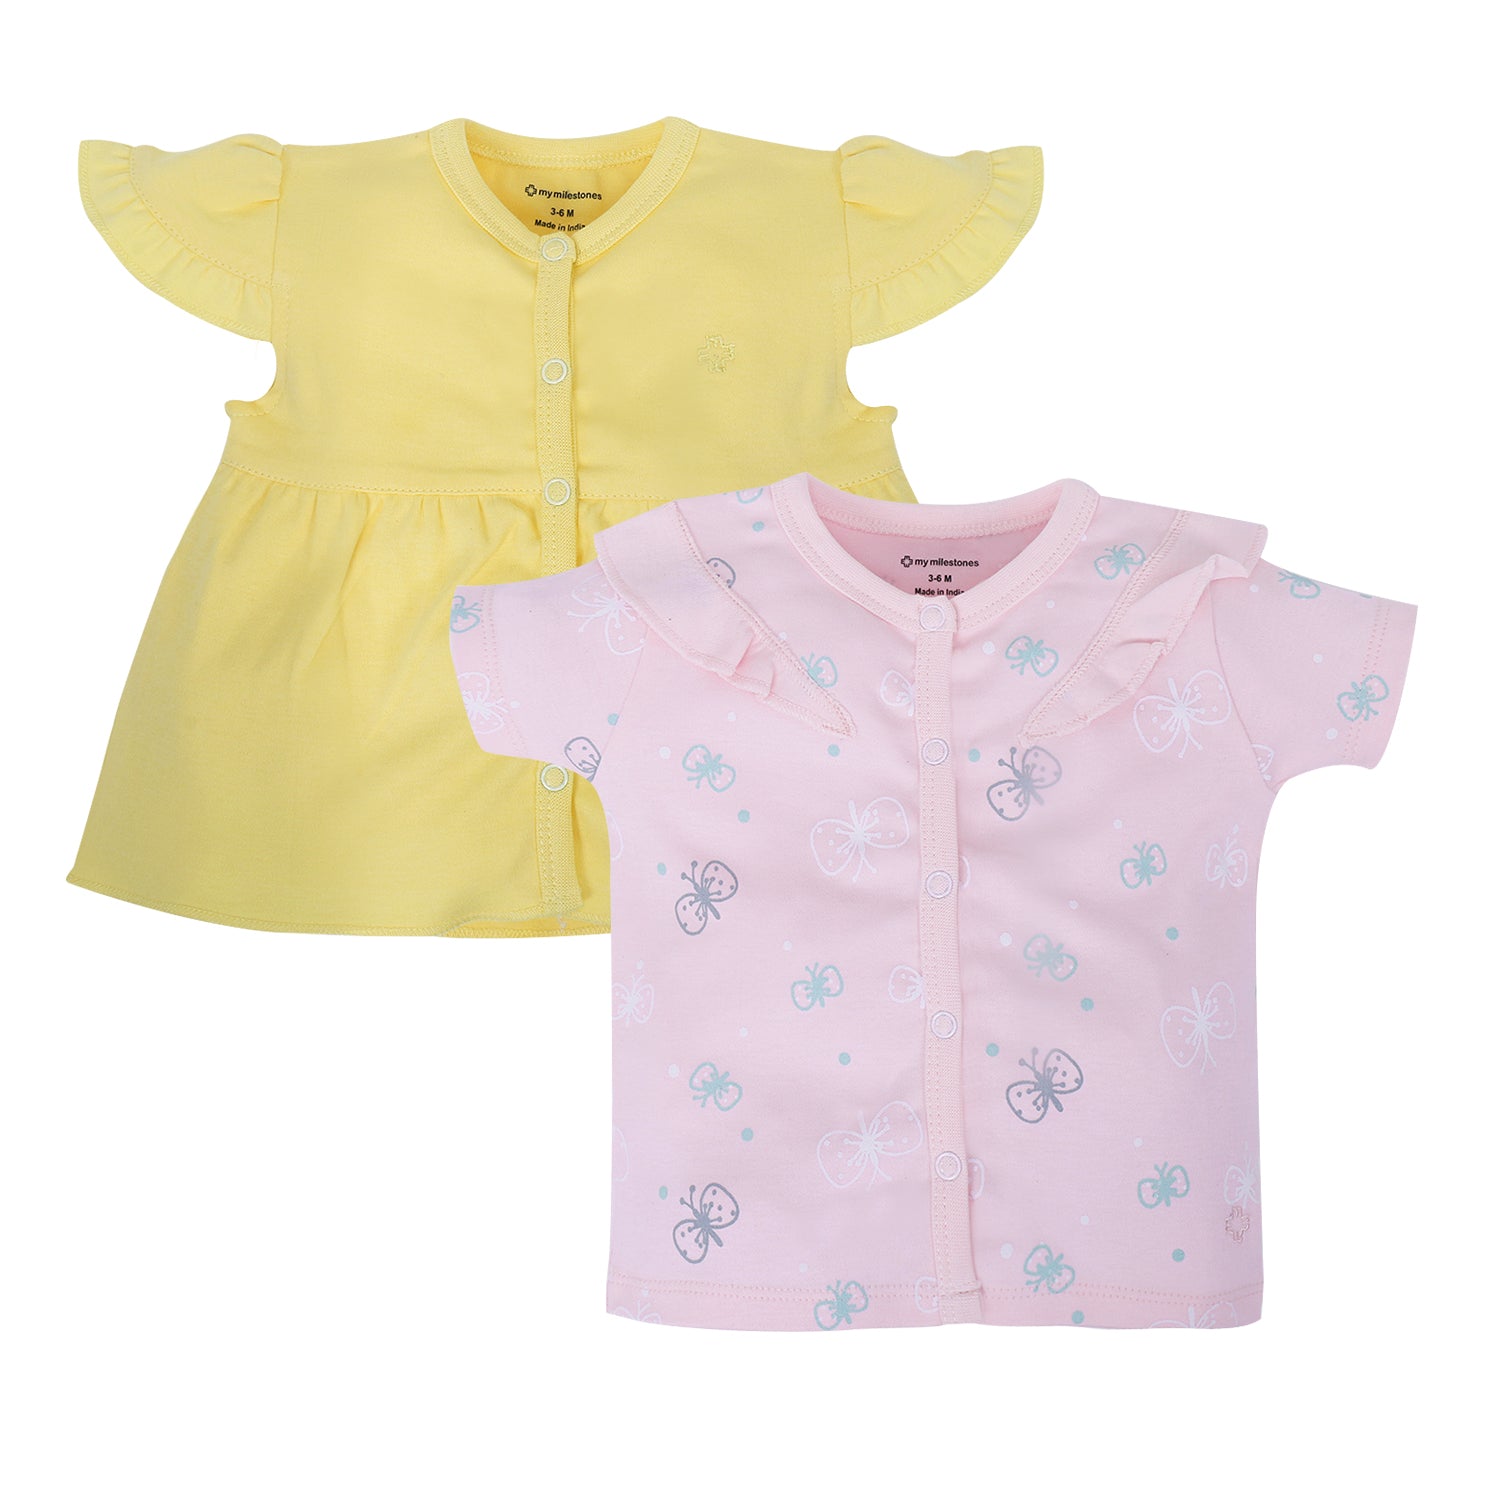 My Milestones T-shirt Half Sleeves Girls Yellow /Pink Butterfly-2Pc Pack